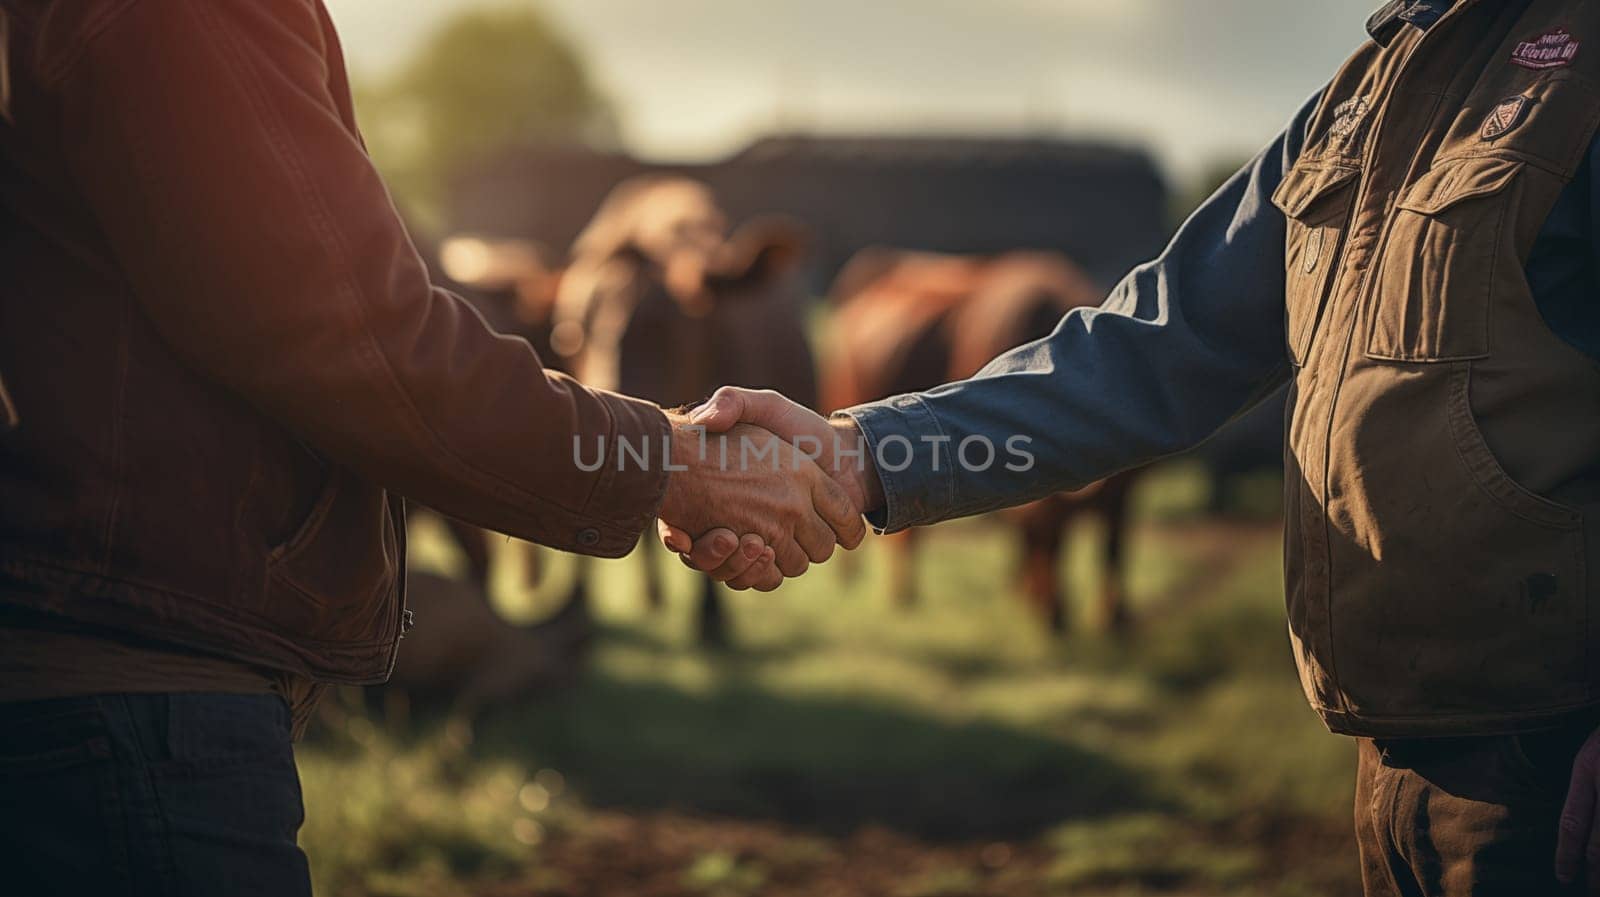 Handshake of two men farmers against the background of a field with grazing brown cows, at sunset.